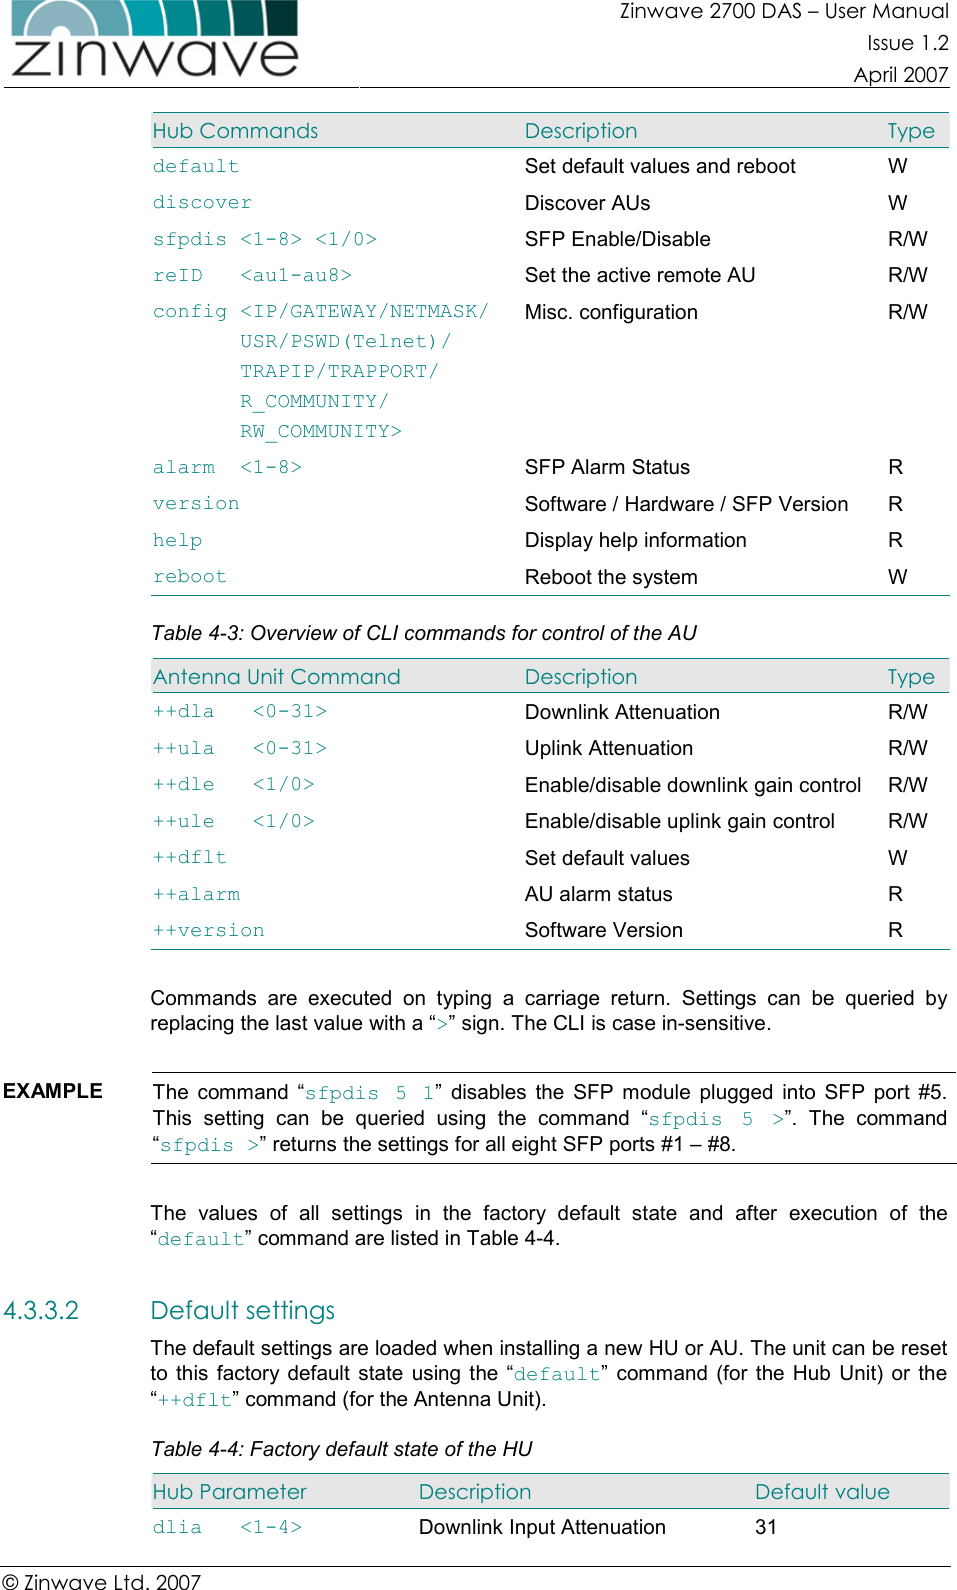 Zinwave 2700 DAS – User Manual Issue 1.2  April 2007  © Zinwave Ltd. 2007  Hub Commands  Description  Type default  Set default values and reboot  W discover  Discover AUs  W sfpdis &lt;1-8&gt; &lt;1/0&gt;                SFP Enable/Disable  R/W reID   &lt;au1-au8&gt;                      Set the active remote AU  R/W config &lt;IP/GATEWAY/NETMASK/        USR/PSWD(Telnet)/        TRAPIP/TRAPPORT/        R_COMMUNITY/        RW_COMMUNITY&gt;   Misc. configuration  R/W alarm  &lt;1-8&gt;                      SFP Alarm Status  R version    Software / Hardware / SFP Version  R help    Display help information  R reboot   Reboot the system  W Table 4-3: Overview of CLI commands for control of the AU Antenna Unit Command  Description  Type ++dla   &lt;0-31&gt;  Downlink Attenuation  R/W ++ula   &lt;0-31&gt;                Uplink Attenuation  R/W ++dle   &lt;1/0&gt;  Enable/disable downlink gain control  R/W ++ule   &lt;1/0&gt;                      Enable/disable uplink gain control  R/W ++dflt                        Set default values  W ++alarm  AU alarm status  R ++version  Software Version  R  Commands  are  executed  on  typing  a  carriage  return.  Settings  can  be  queried  by replacing the last value with a “&gt;” sign. The CLI is case in-sensitive.  EXAMPLE  The  command  “sfpdis  5  1”  disables  the  SFP  module  plugged  into  SFP  port  #5. This  setting  can  be  queried  using  the  command  “sfpdis  5  &gt;”.  The  command “sfpdis &gt;” returns the settings for all eight SFP ports #1 – #8.  The  values  of  all  settings  in  the  factory  default  state  and  after  execution  of  the “default” command are listed in Table 4-4.  4.3.3.2 Default settings The default settings are loaded when installing a new HU or AU. The unit can be reset to this  factory  default  state  using the  “default”  command (for  the Hub  Unit)  or  the “++dflt” command (for the Antenna Unit). Table 4-4: Factory default state of the HU Hub Parameter  Description  Default value dlia   &lt;1-4&gt;  Downlink Input Attenuation  31 